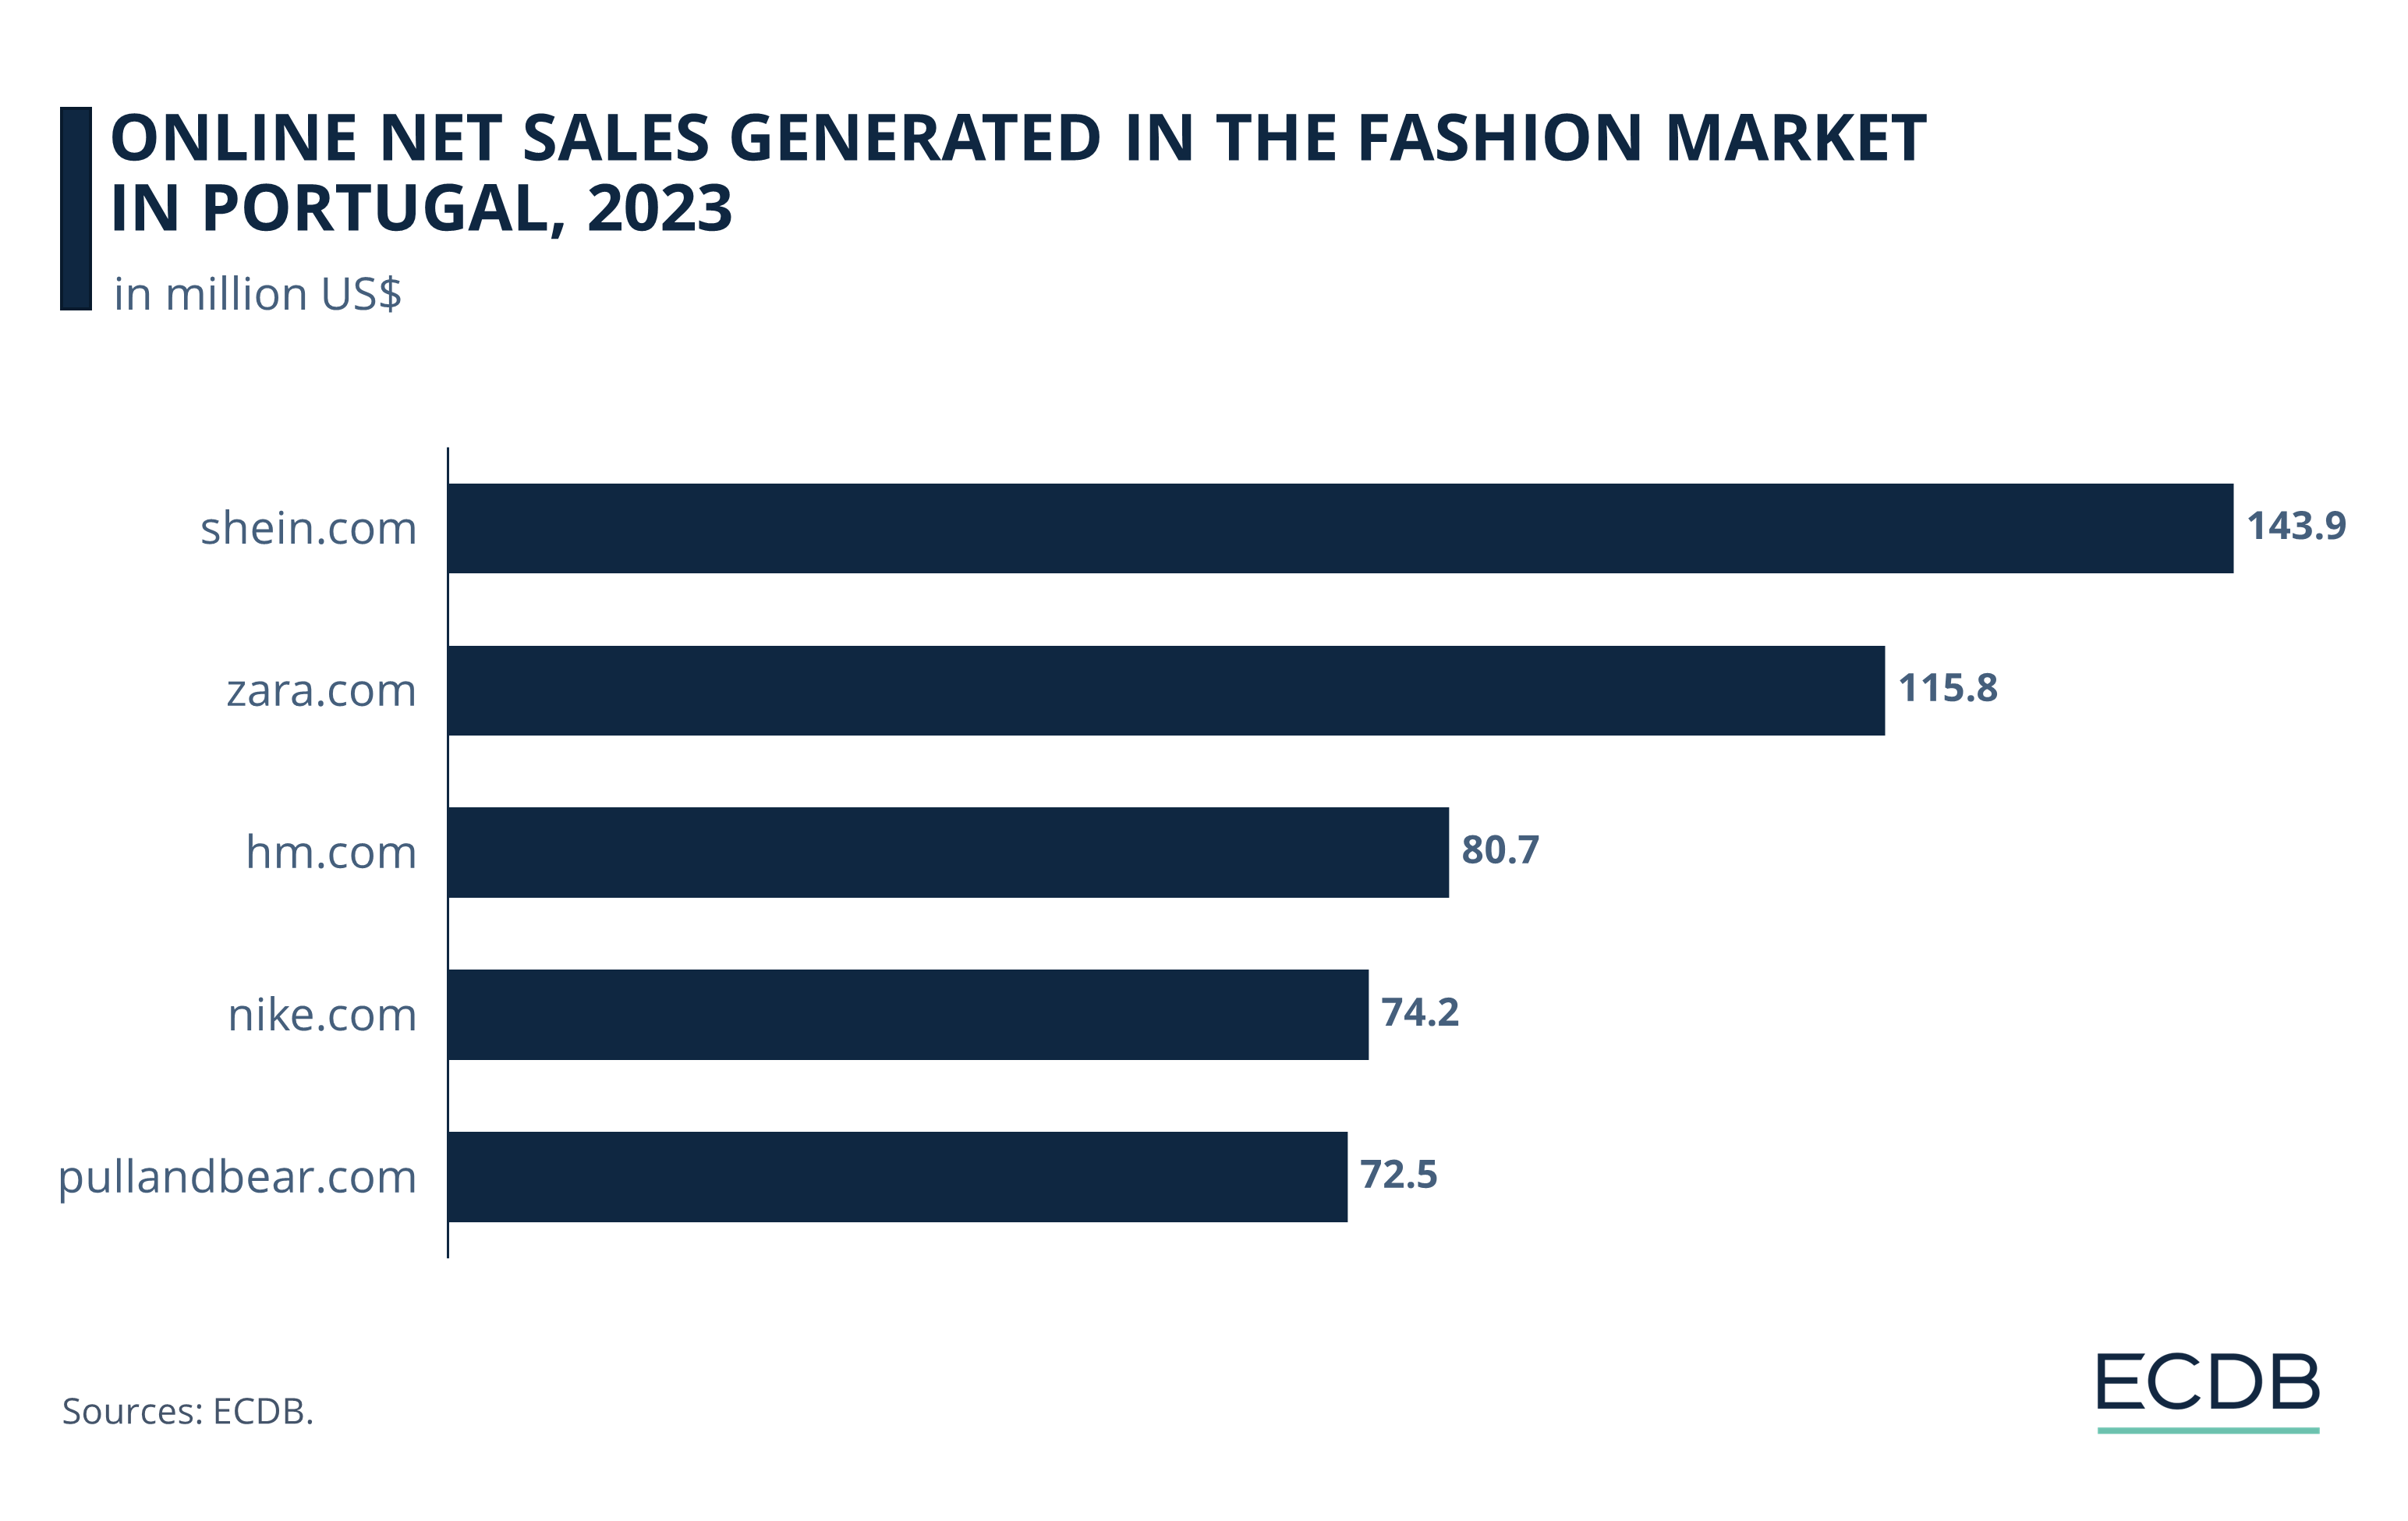 Online Net Sales Generated in the Fashion Market in Portugal, 2022